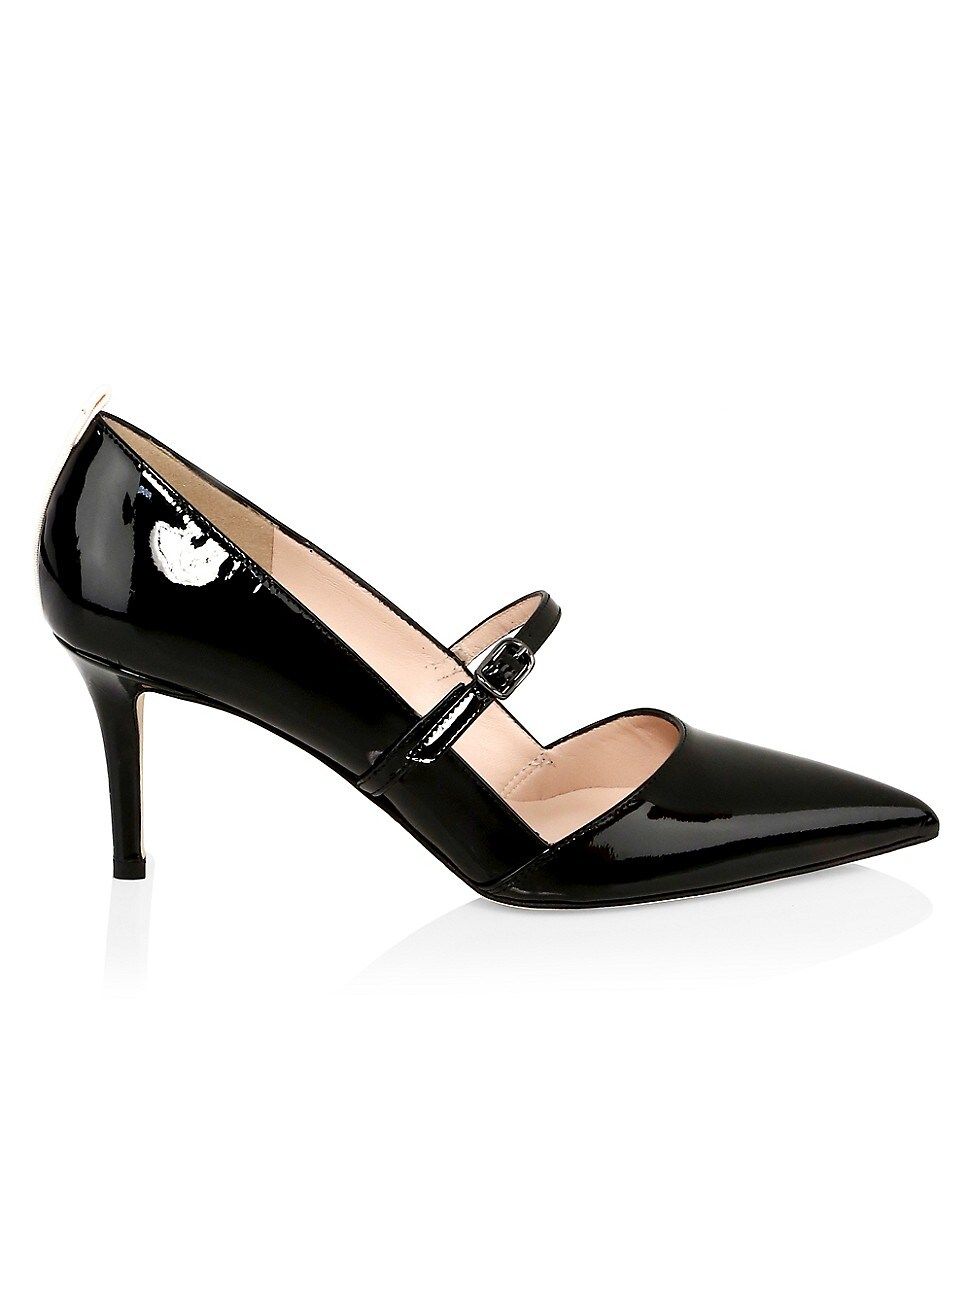 Nirvana Patent Leather Mary Jane Pumps | Saks Fifth Avenue